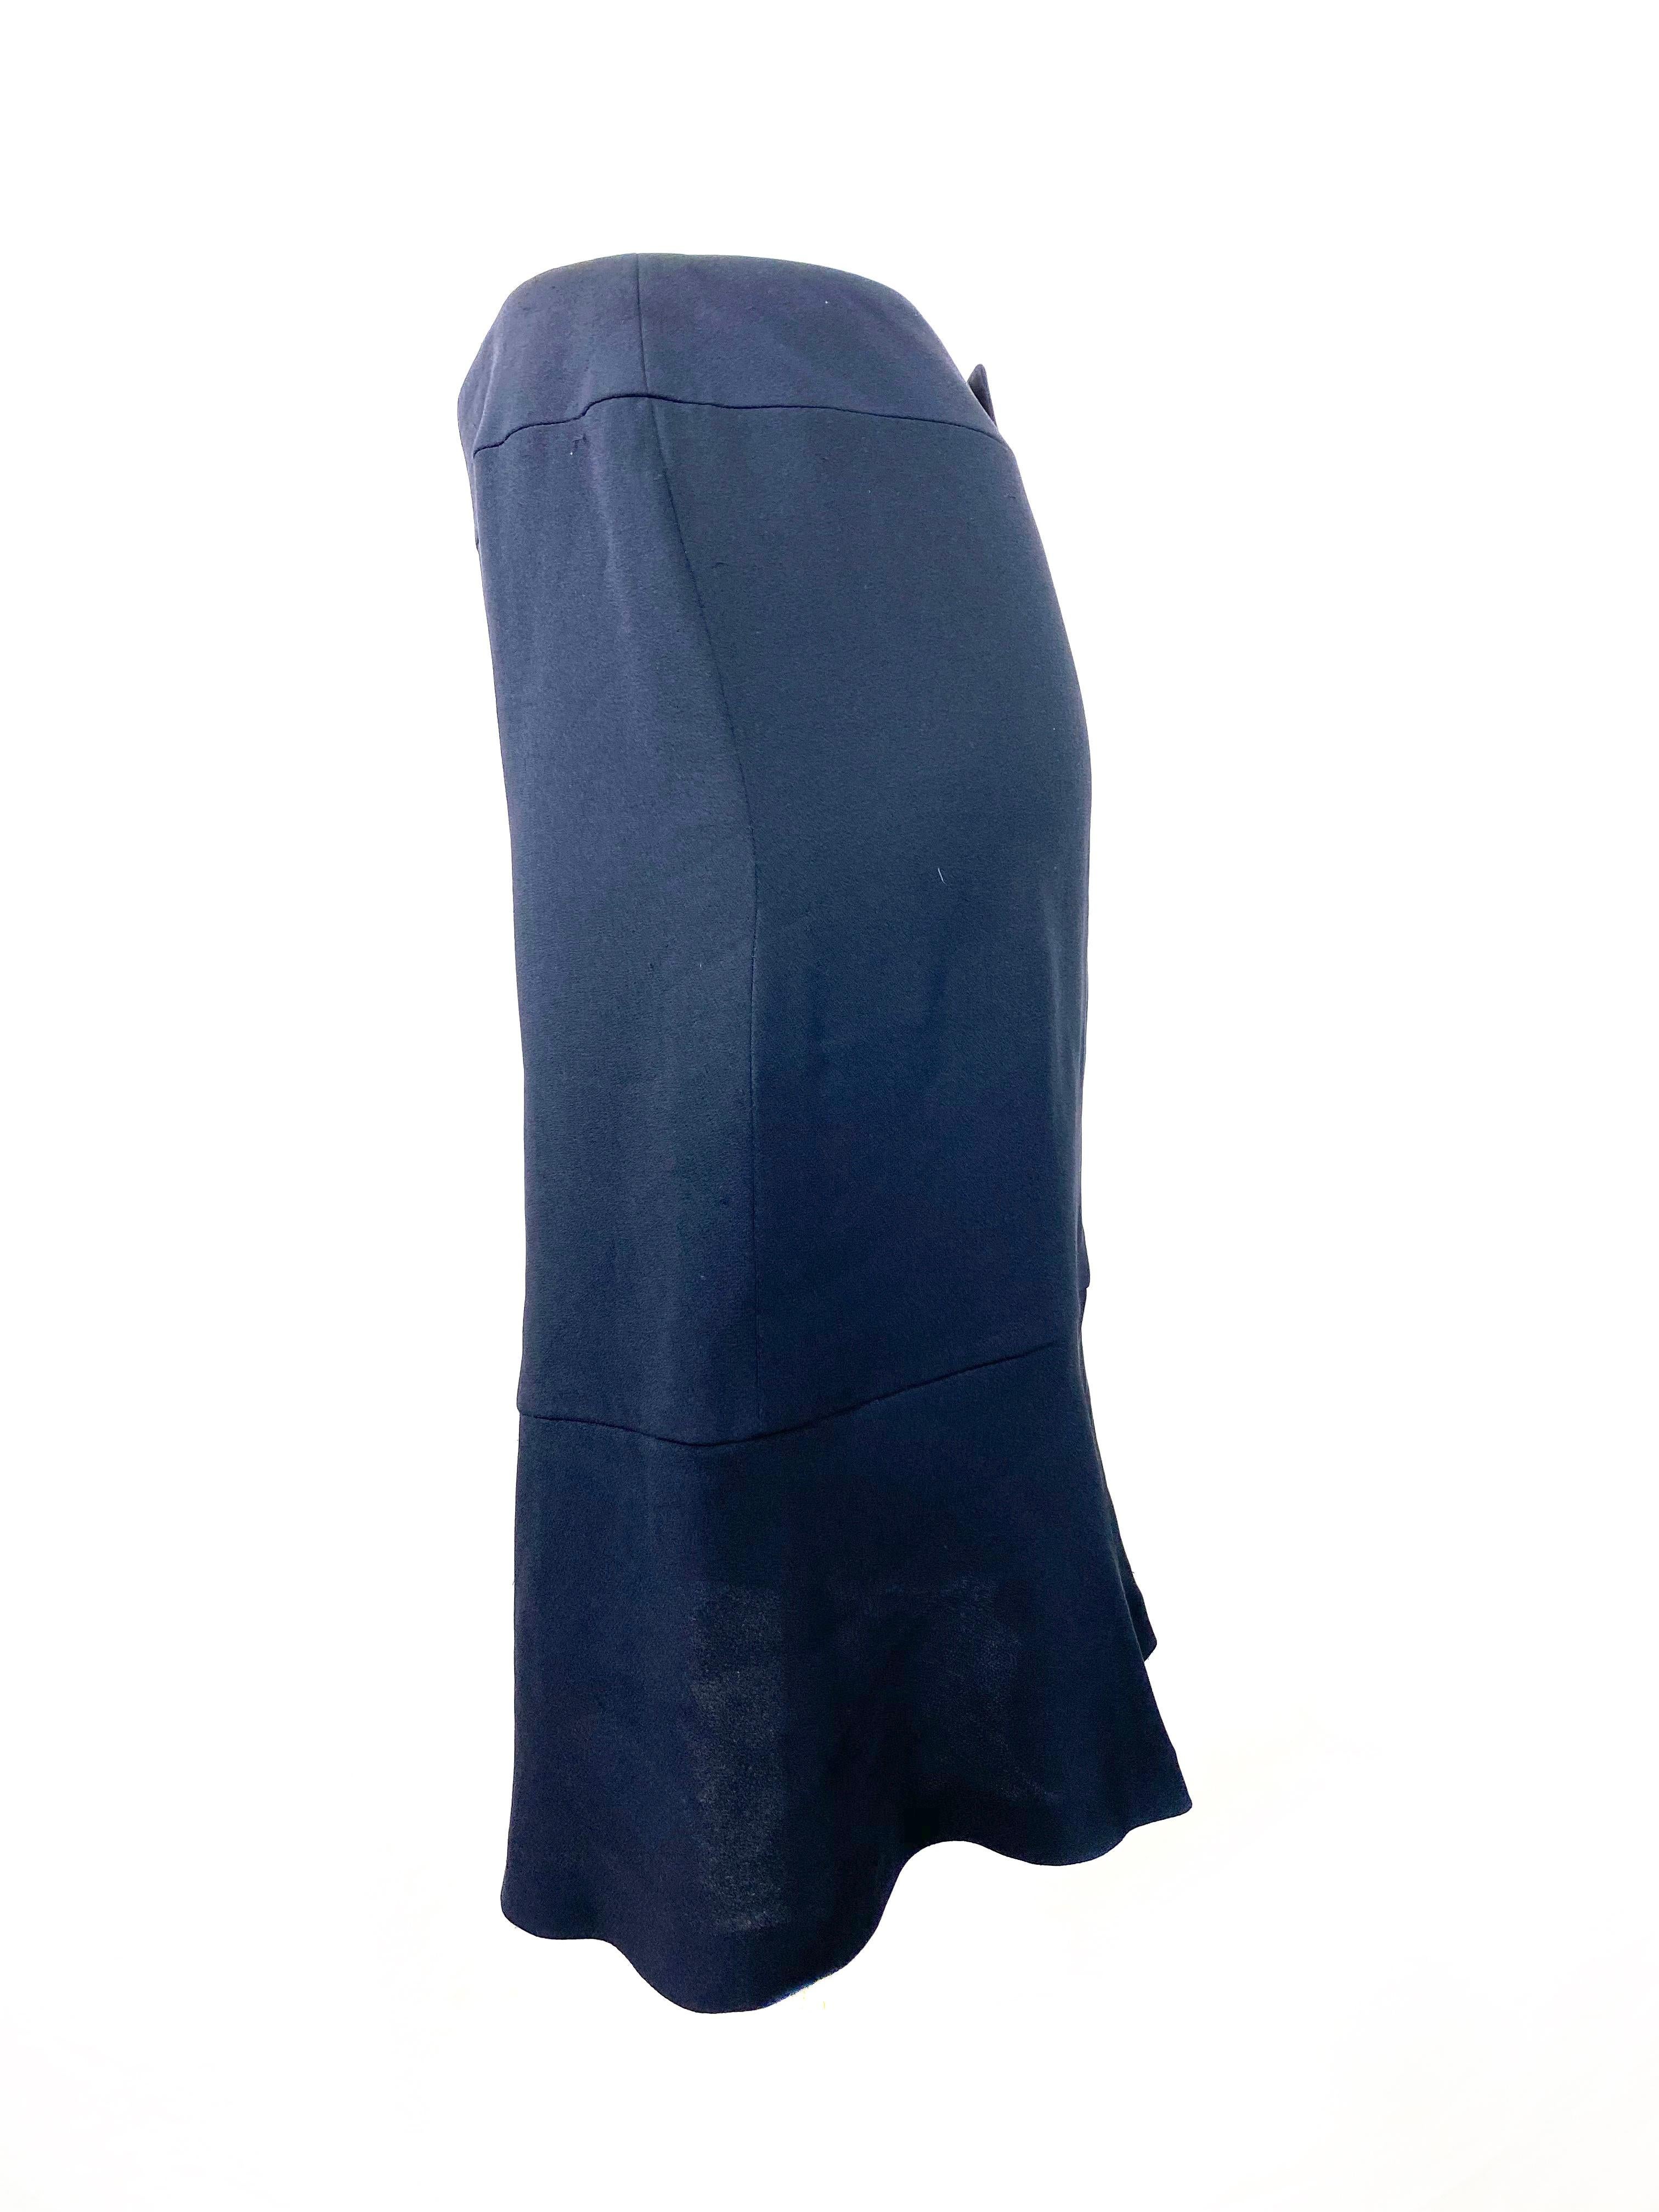 Product details:

Featuring, navy/ dark blue silk, mid knee length, rear buttons and sip closure, double silk lining.
Made in France.